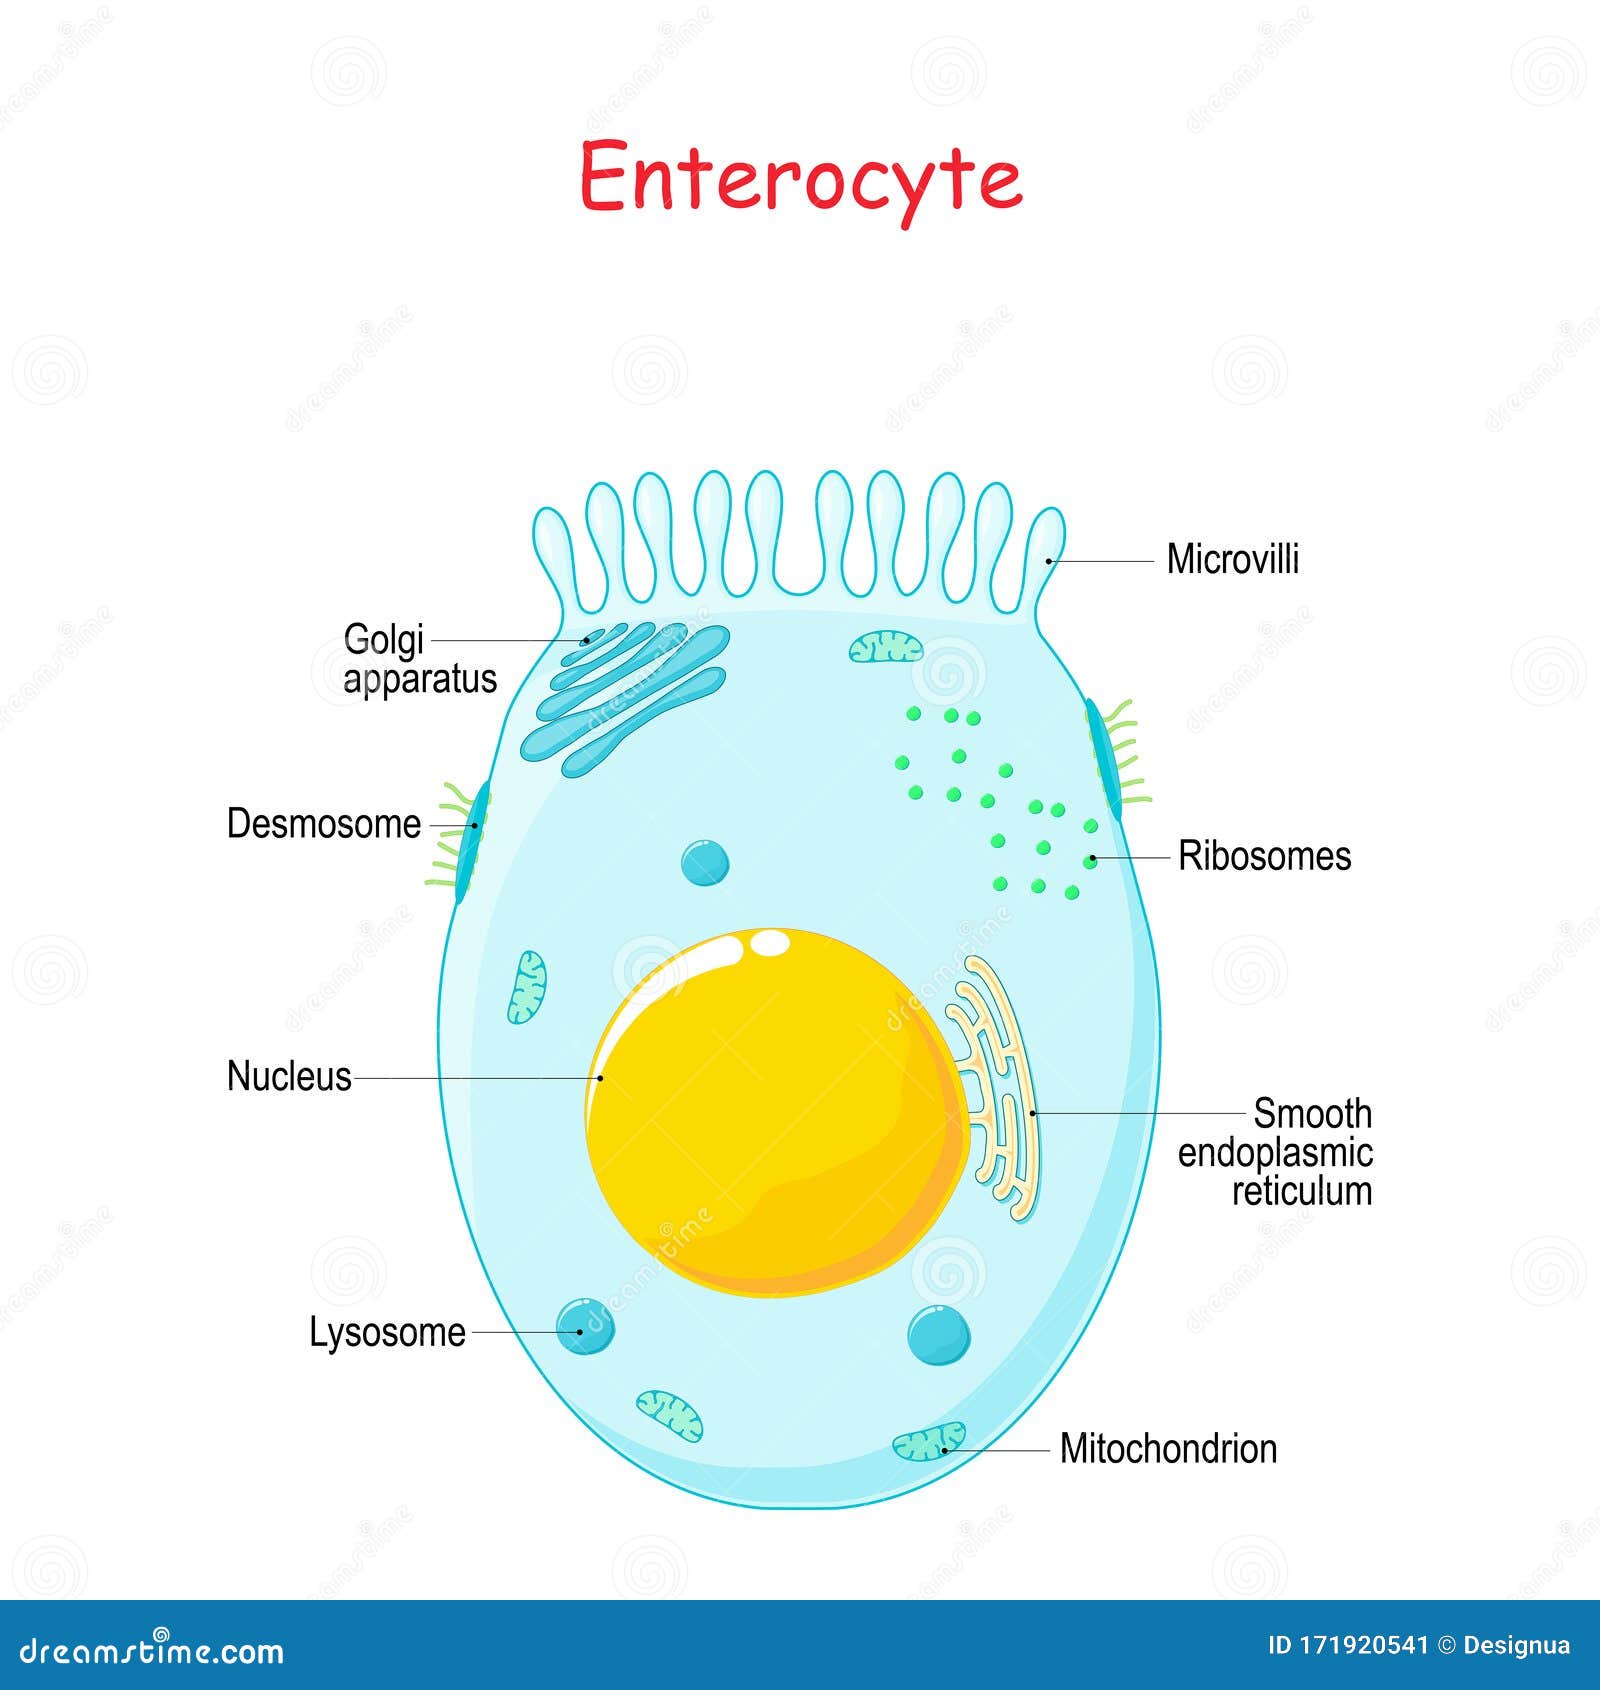 enterocyte. structure of the intestinal absorptive epithelial cell with microvilli